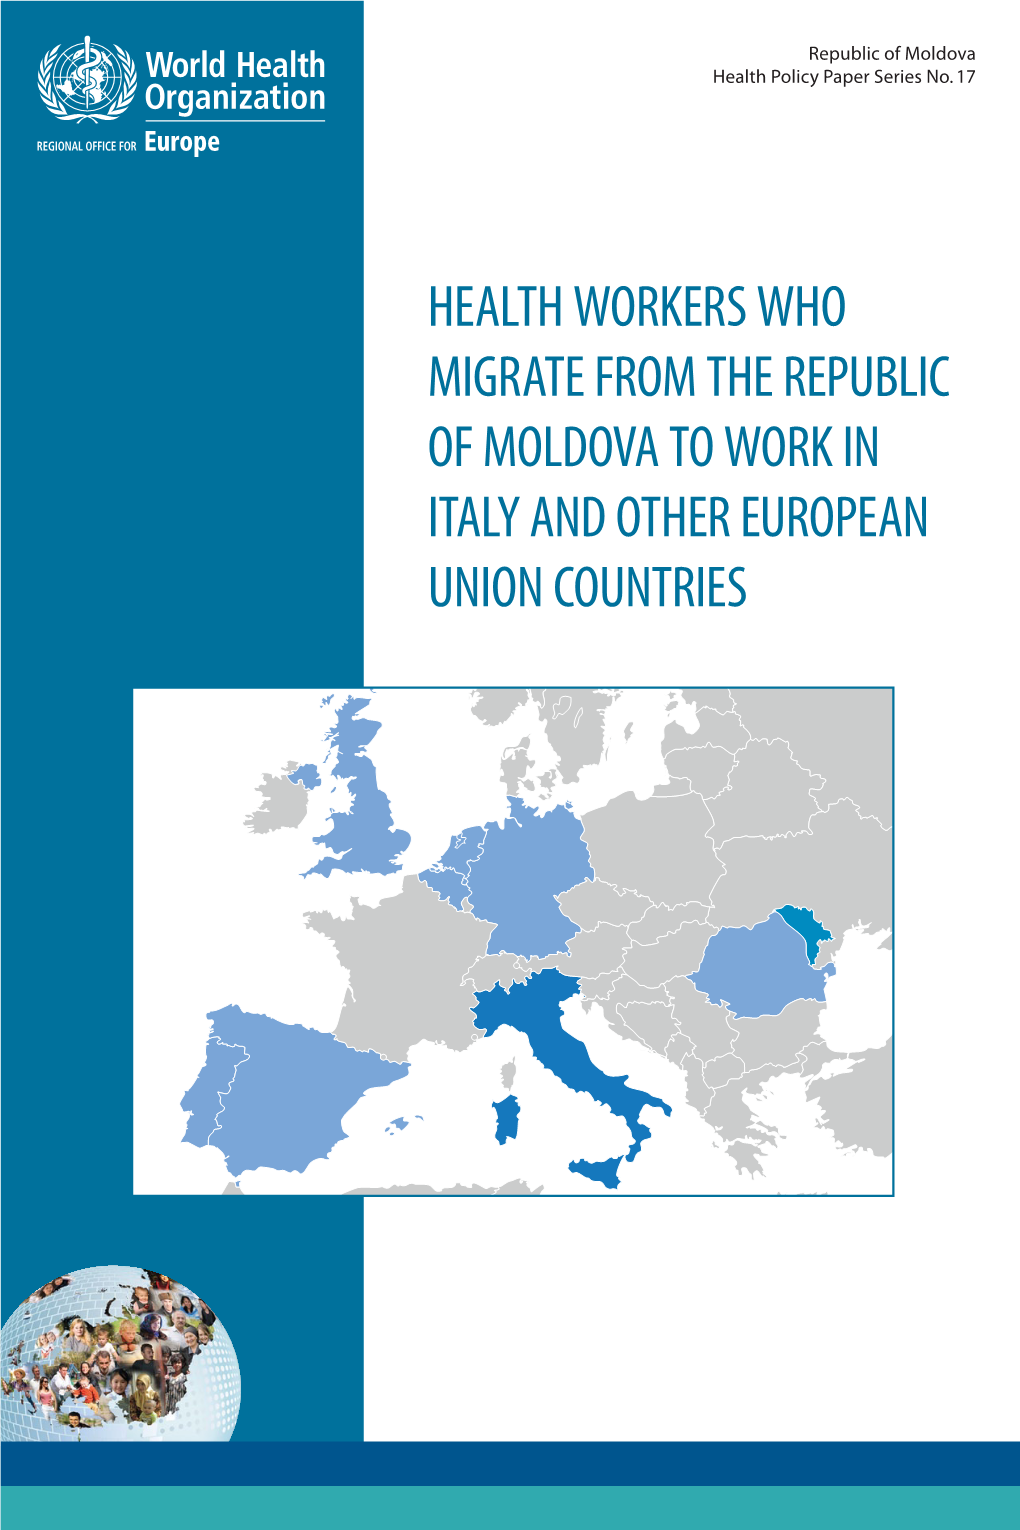 Health Workers Who Migrate from the Republic of Moldova to Work in Italy and Other European Union Countries